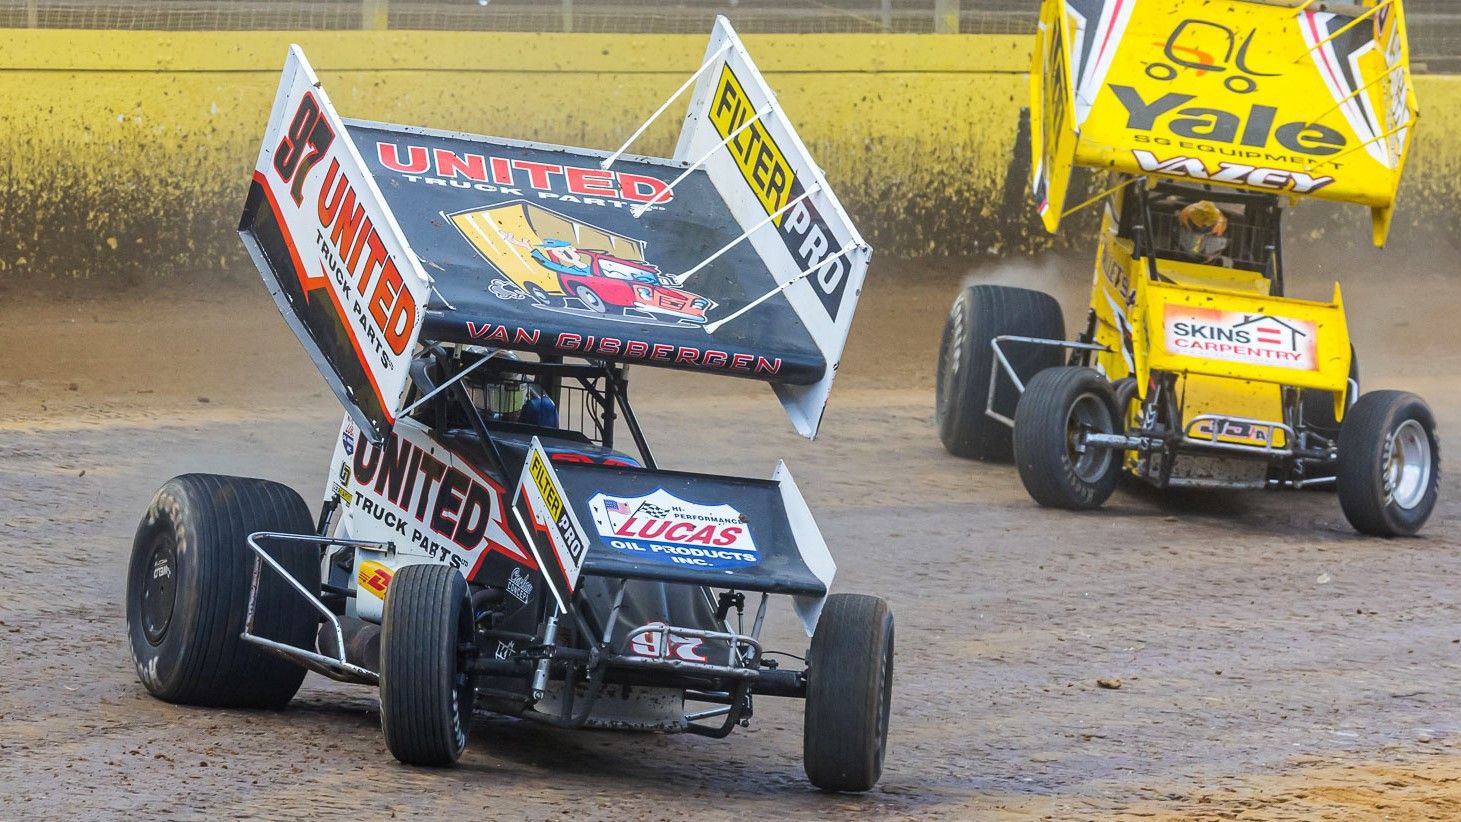 Shane van Gisbergen finished 14th in the feature race on his sprint car debut at Western Spring Speedway.